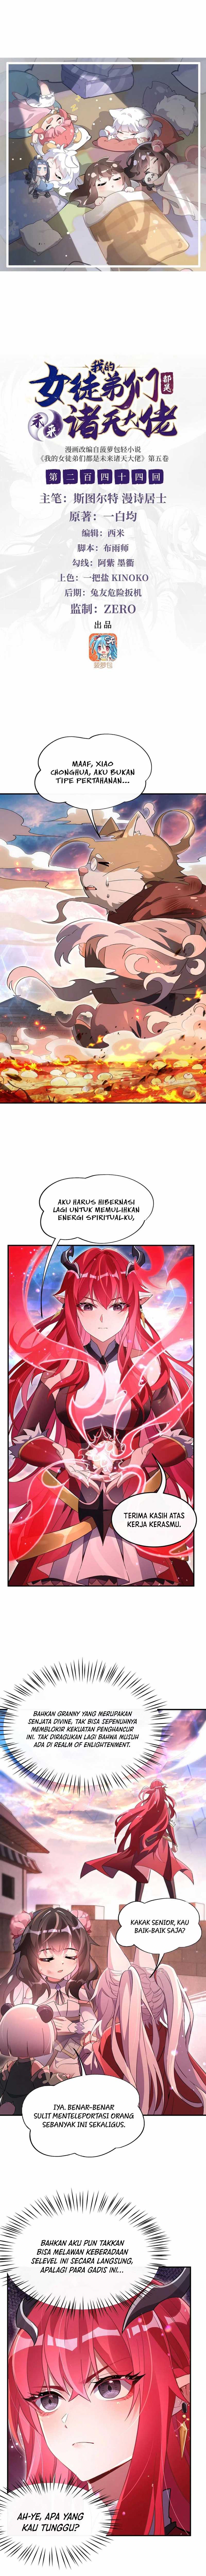 Dilarang COPAS - situs resmi www.mangacanblog.com - Komik my female apprentices are all big shots from the future 244 - chapter 244 245 Indonesia my female apprentices are all big shots from the future 244 - chapter 244 Terbaru 1|Baca Manga Komik Indonesia|Mangacan